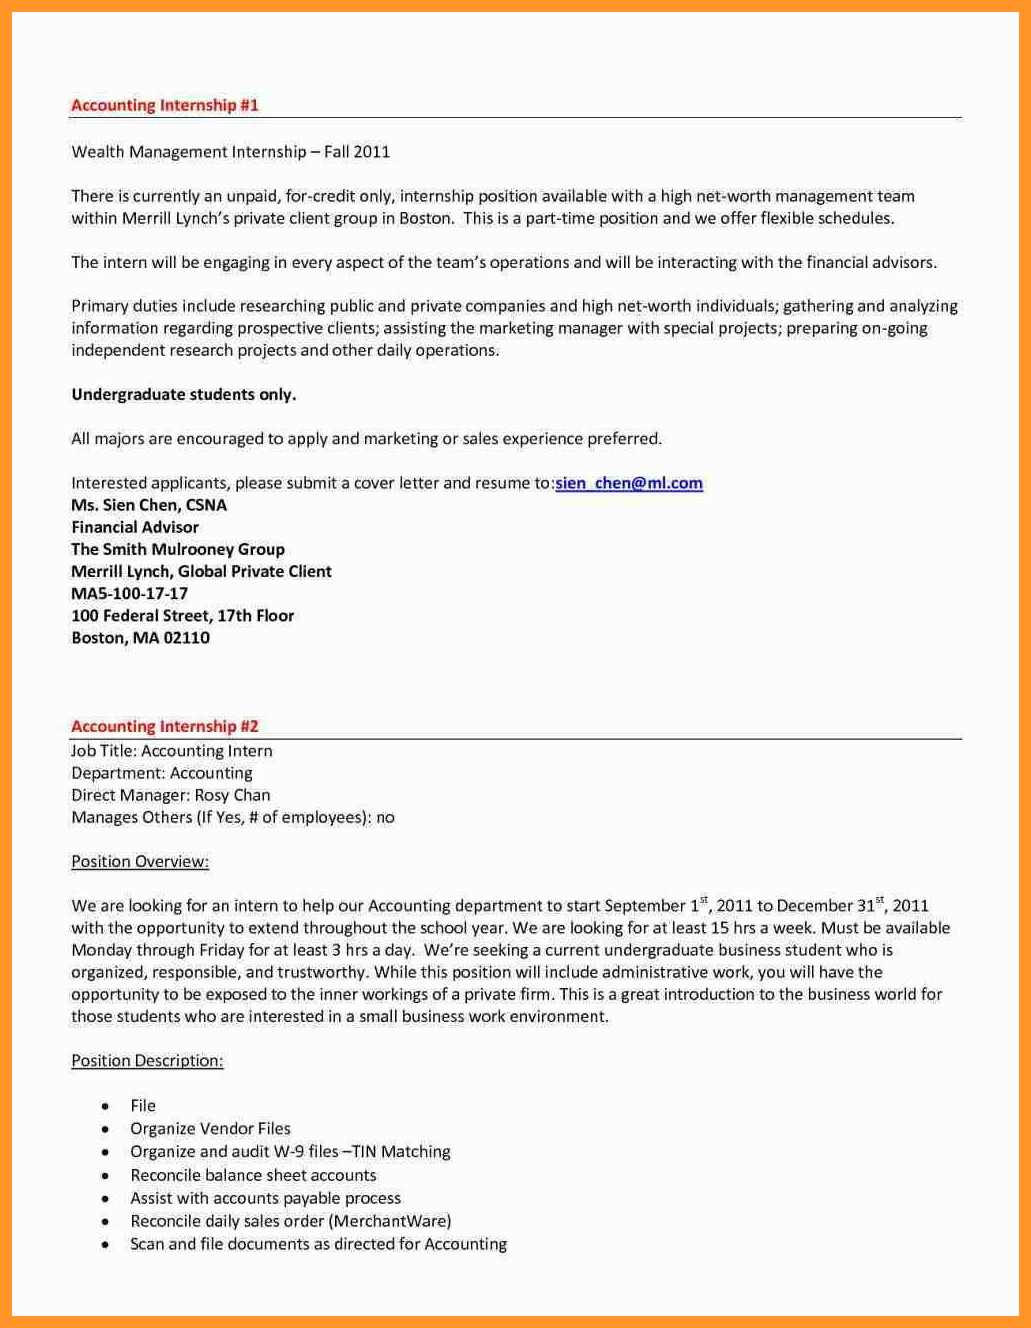 12-13 Accountant Cover Letter Sample Pdf | Loginnelkriver throughout Accountant Cover Letter Template